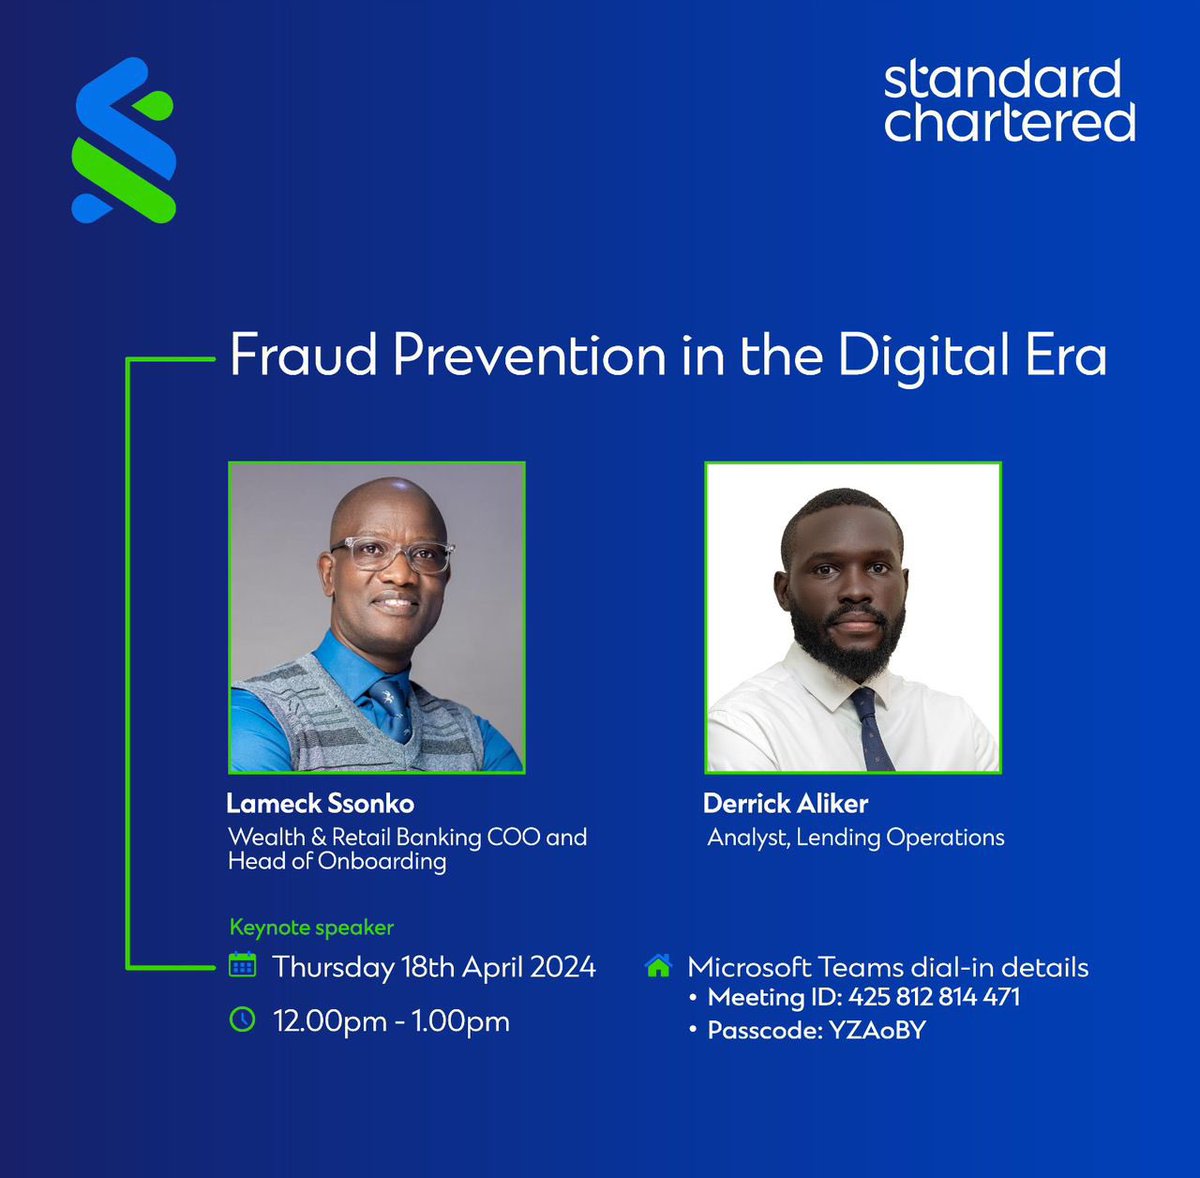 Reminding you that a must attend educational webinar on fraud prevention in the digital age is set to happen today from 12 to 1pm ✅

We shall be live on microsoft teams, join in for this great opportunity!
#ScEgabuddeAkapya #HereForGood